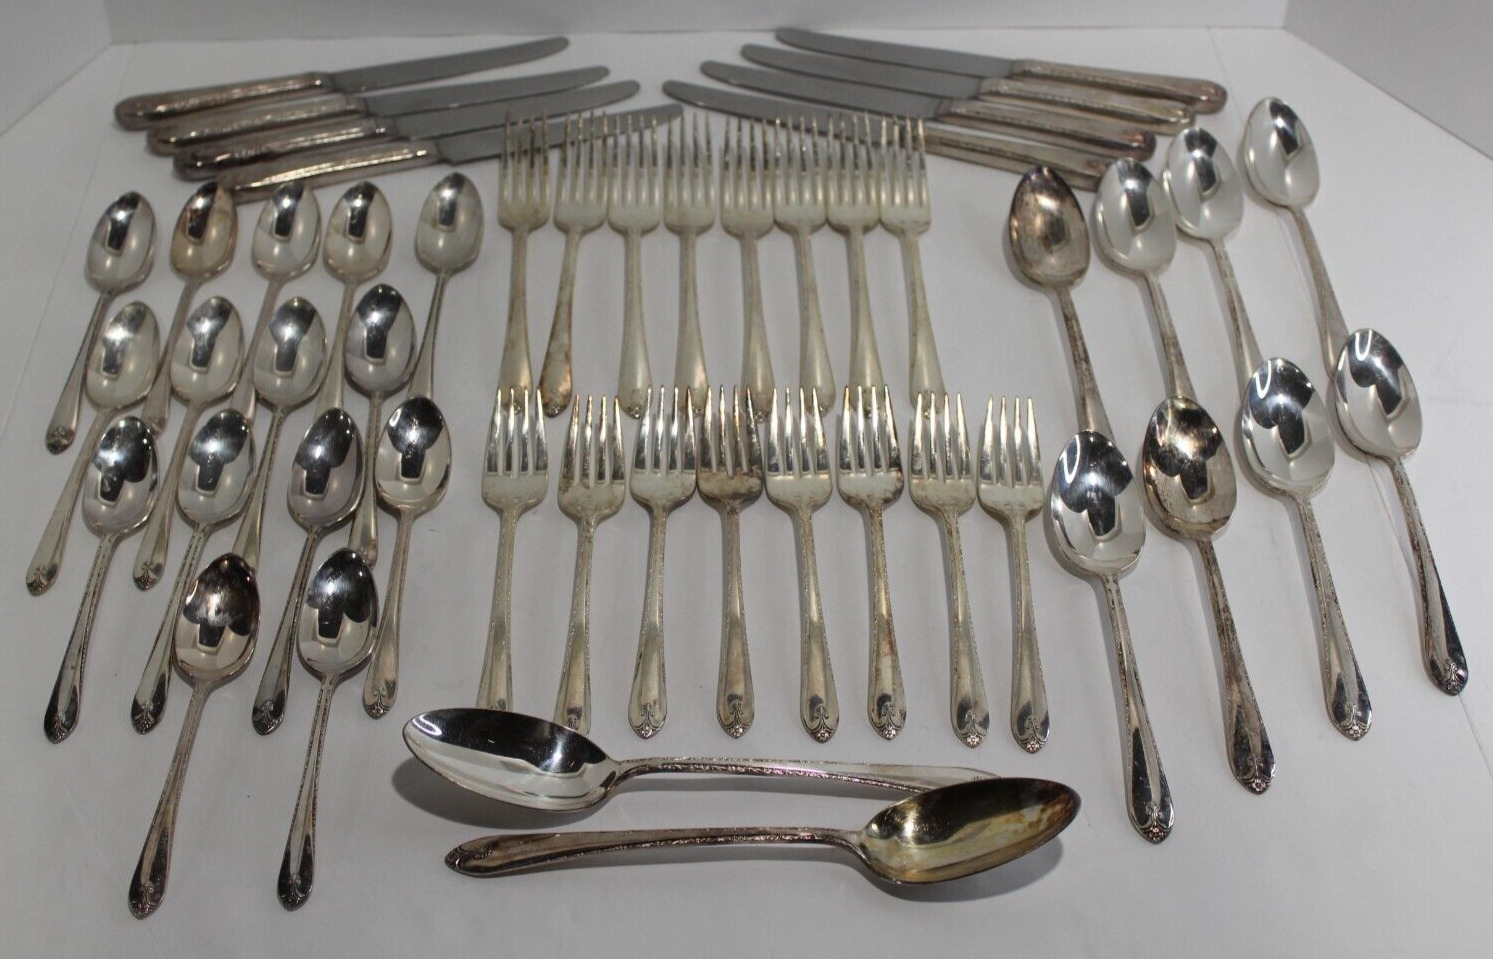 50 Piece Wm Rogers & Son IS  Exquisite Silverplate Flatware Service for 8